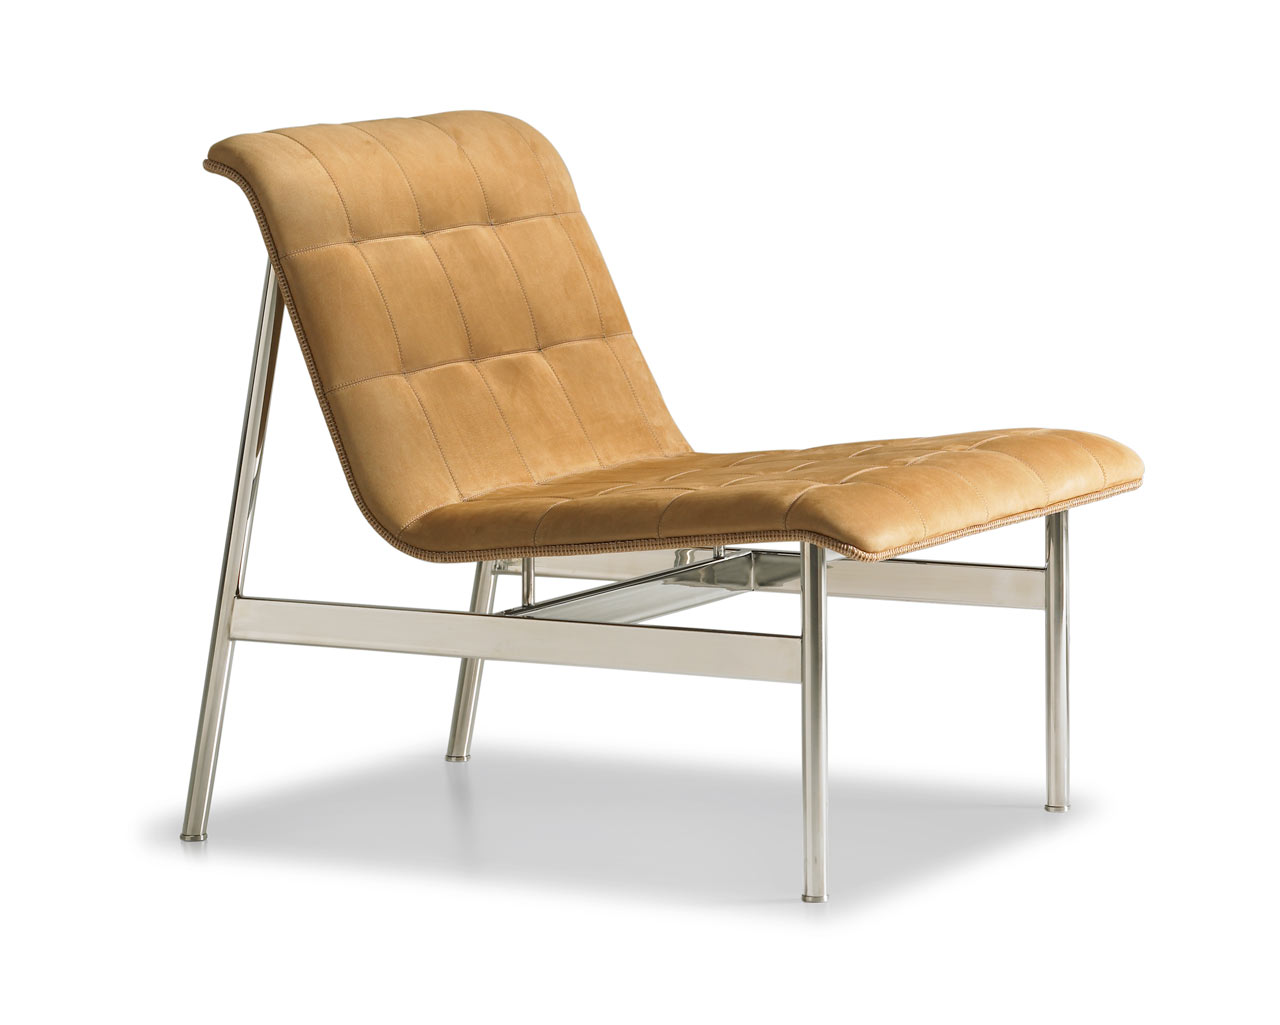 Working With A Mid-Century Master: The CP Lounge by Bernhardt